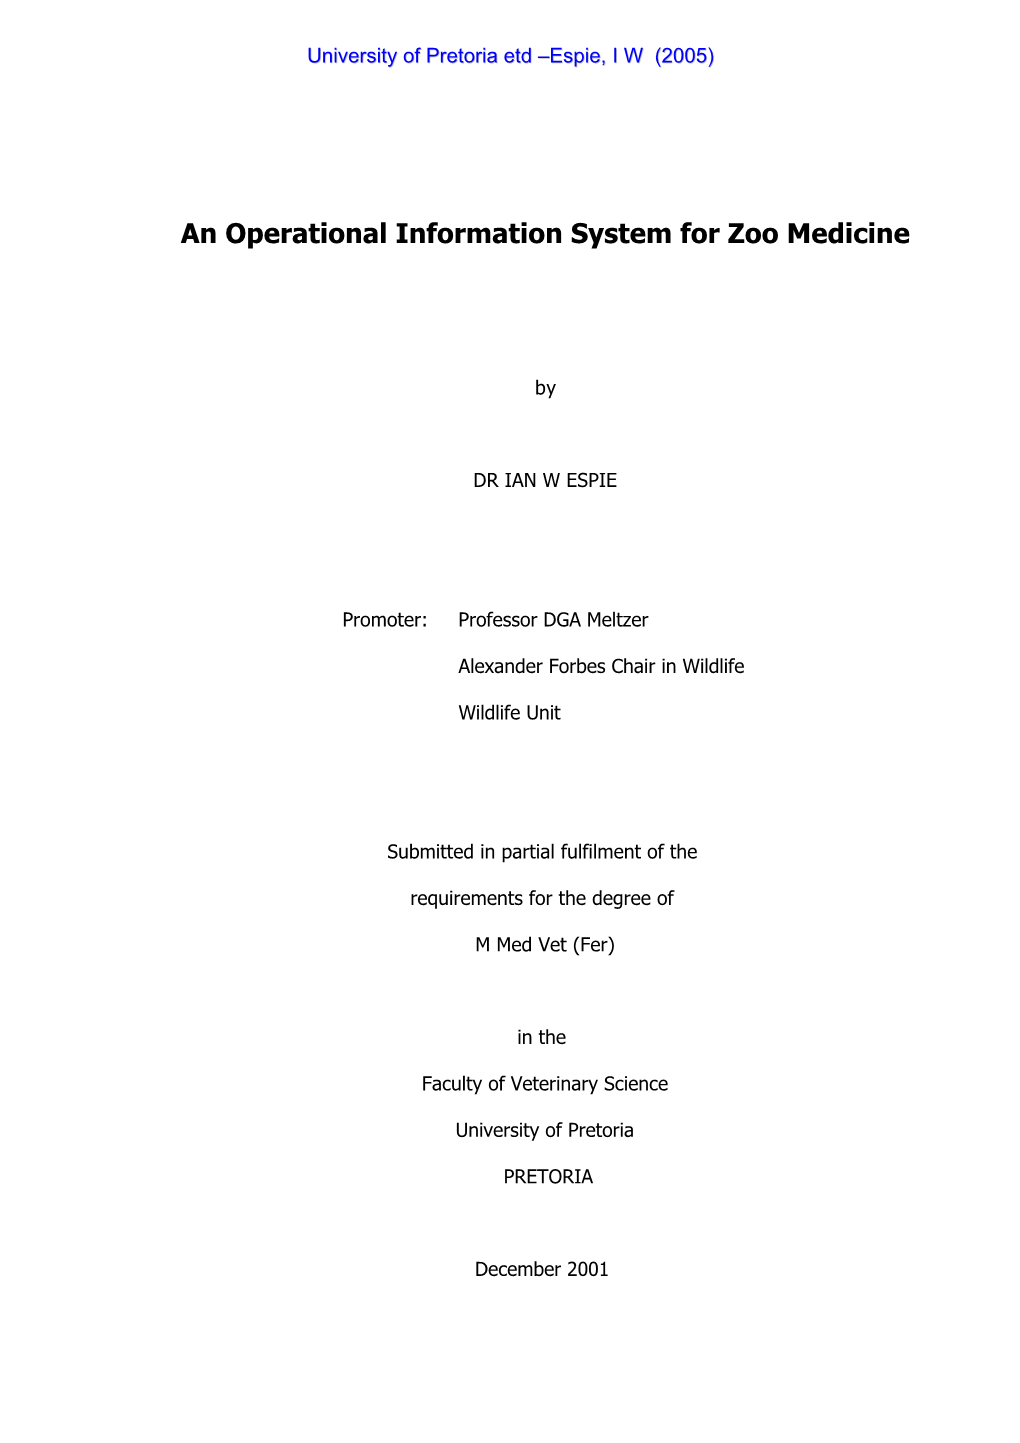 An Operational Information System for Zoo Medicine